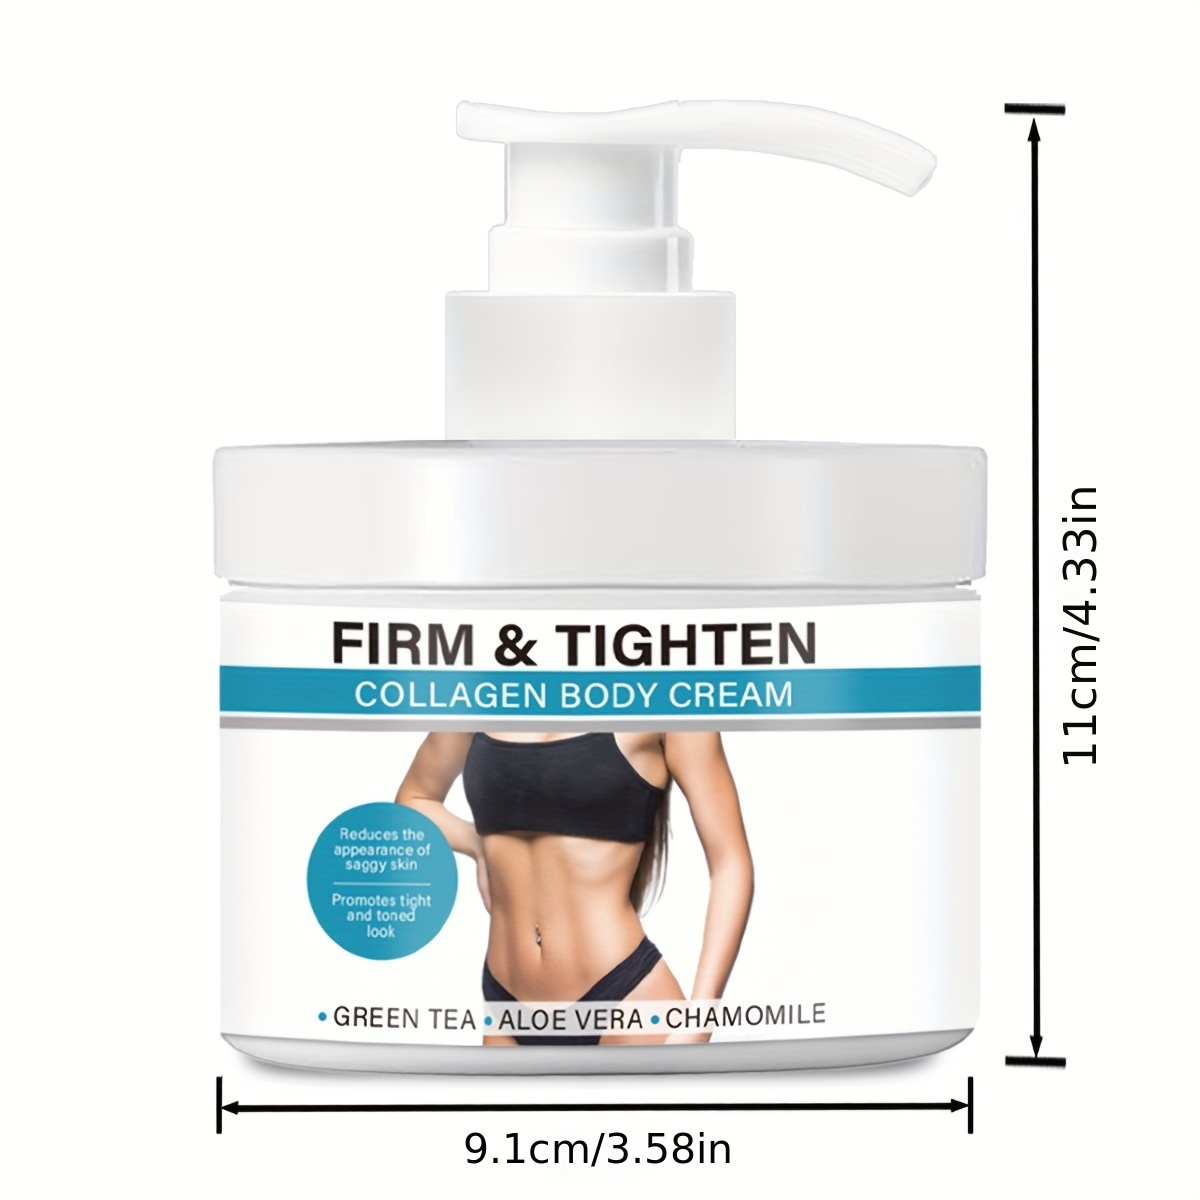 300g Collagen Body & Face Cream Moisturizing Skin Care Lotion, Skin  Tightening Puffiness Body Lotion Improves Elasticity, Plumps Sagging Skin,  Contain